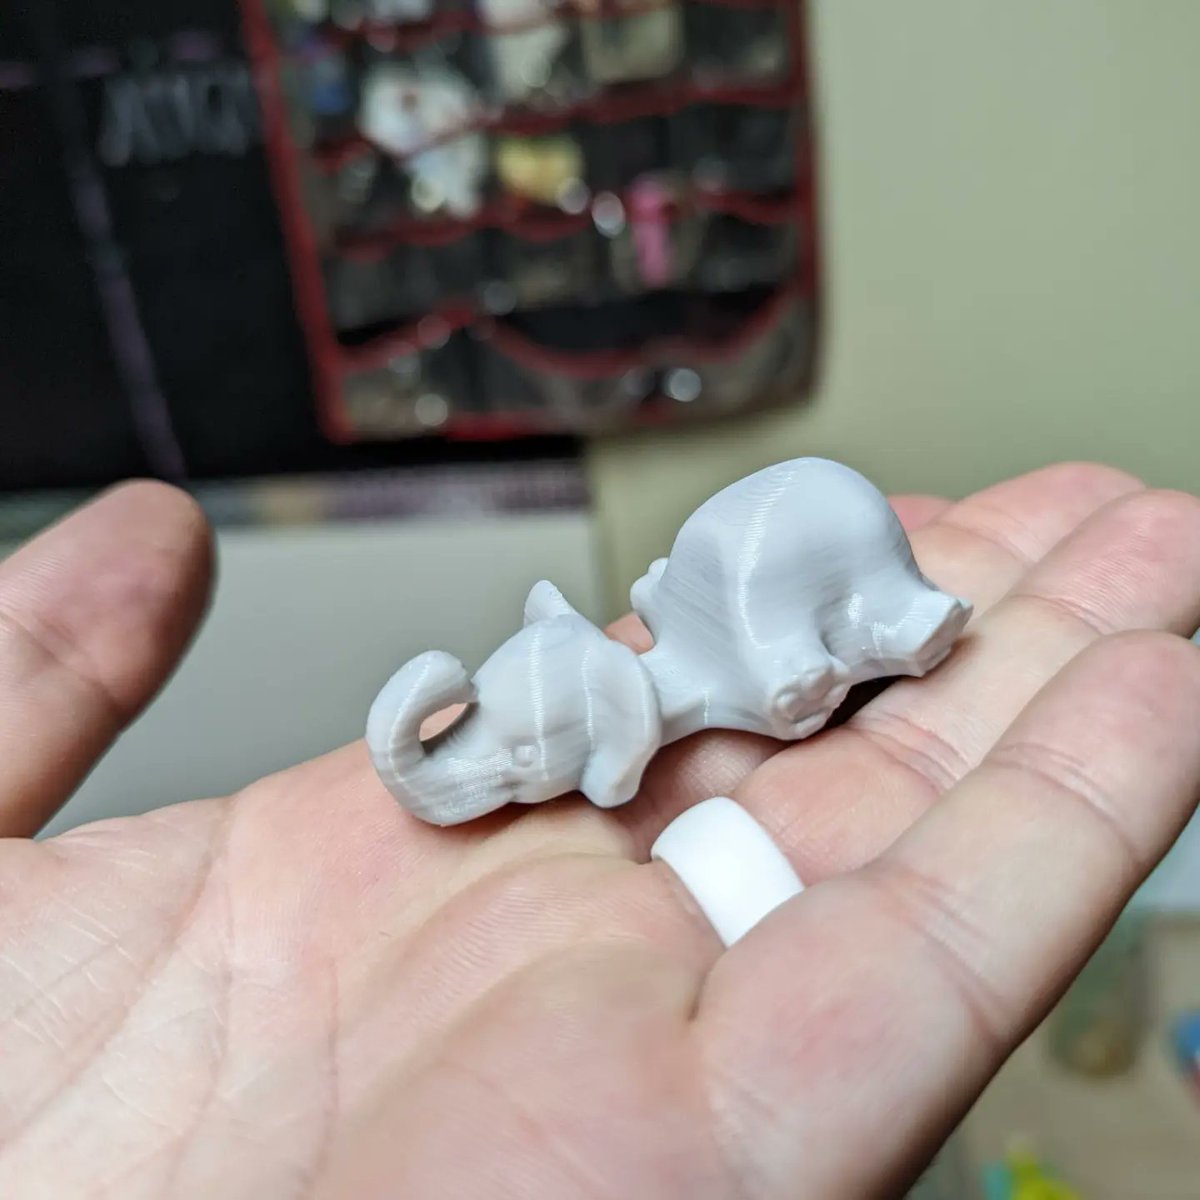 After finally getting my 3D printer properly levelled I have a successful print 😁

It's an elephant cellphone stand

#ender #ender3 #3dprinting #3dprint #elephant #cellphone #cellphonestand